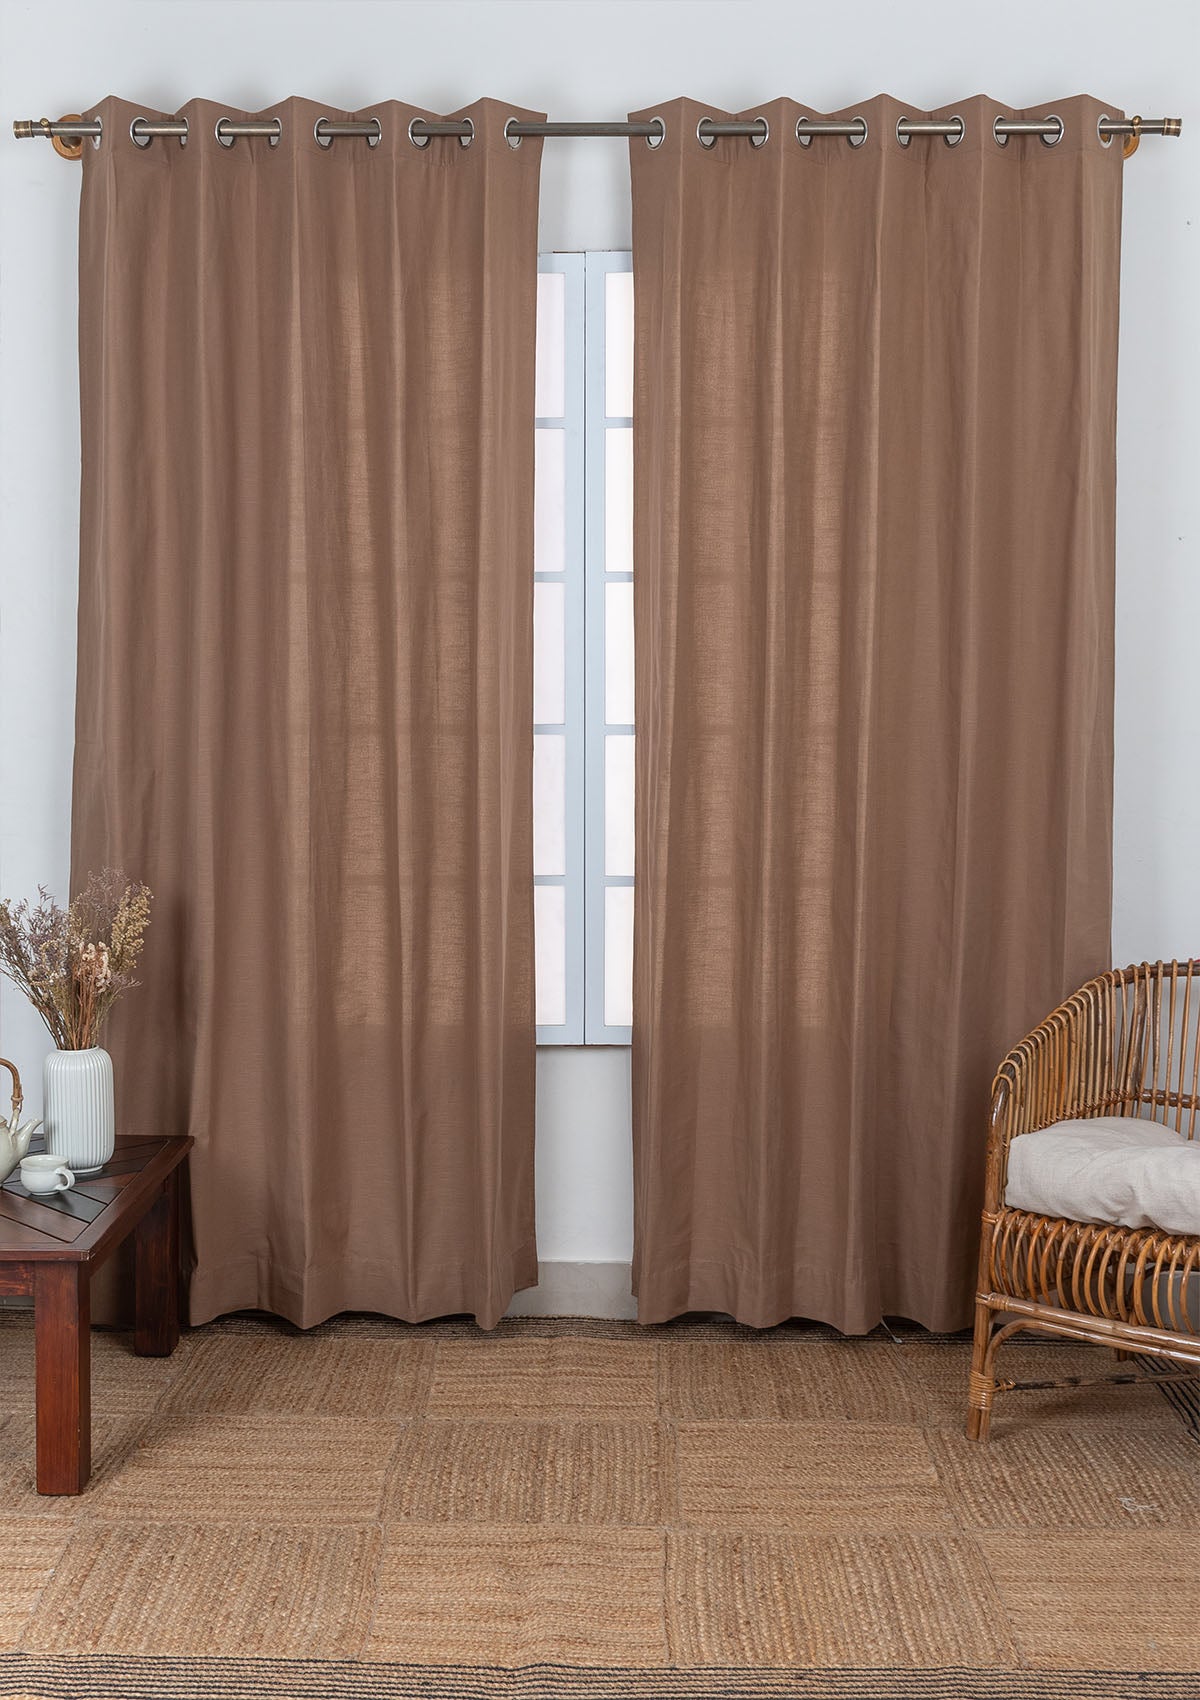 Solid chocolate brown 100% cotton plain curtain for bedroom - Room darkening - Pack of 1